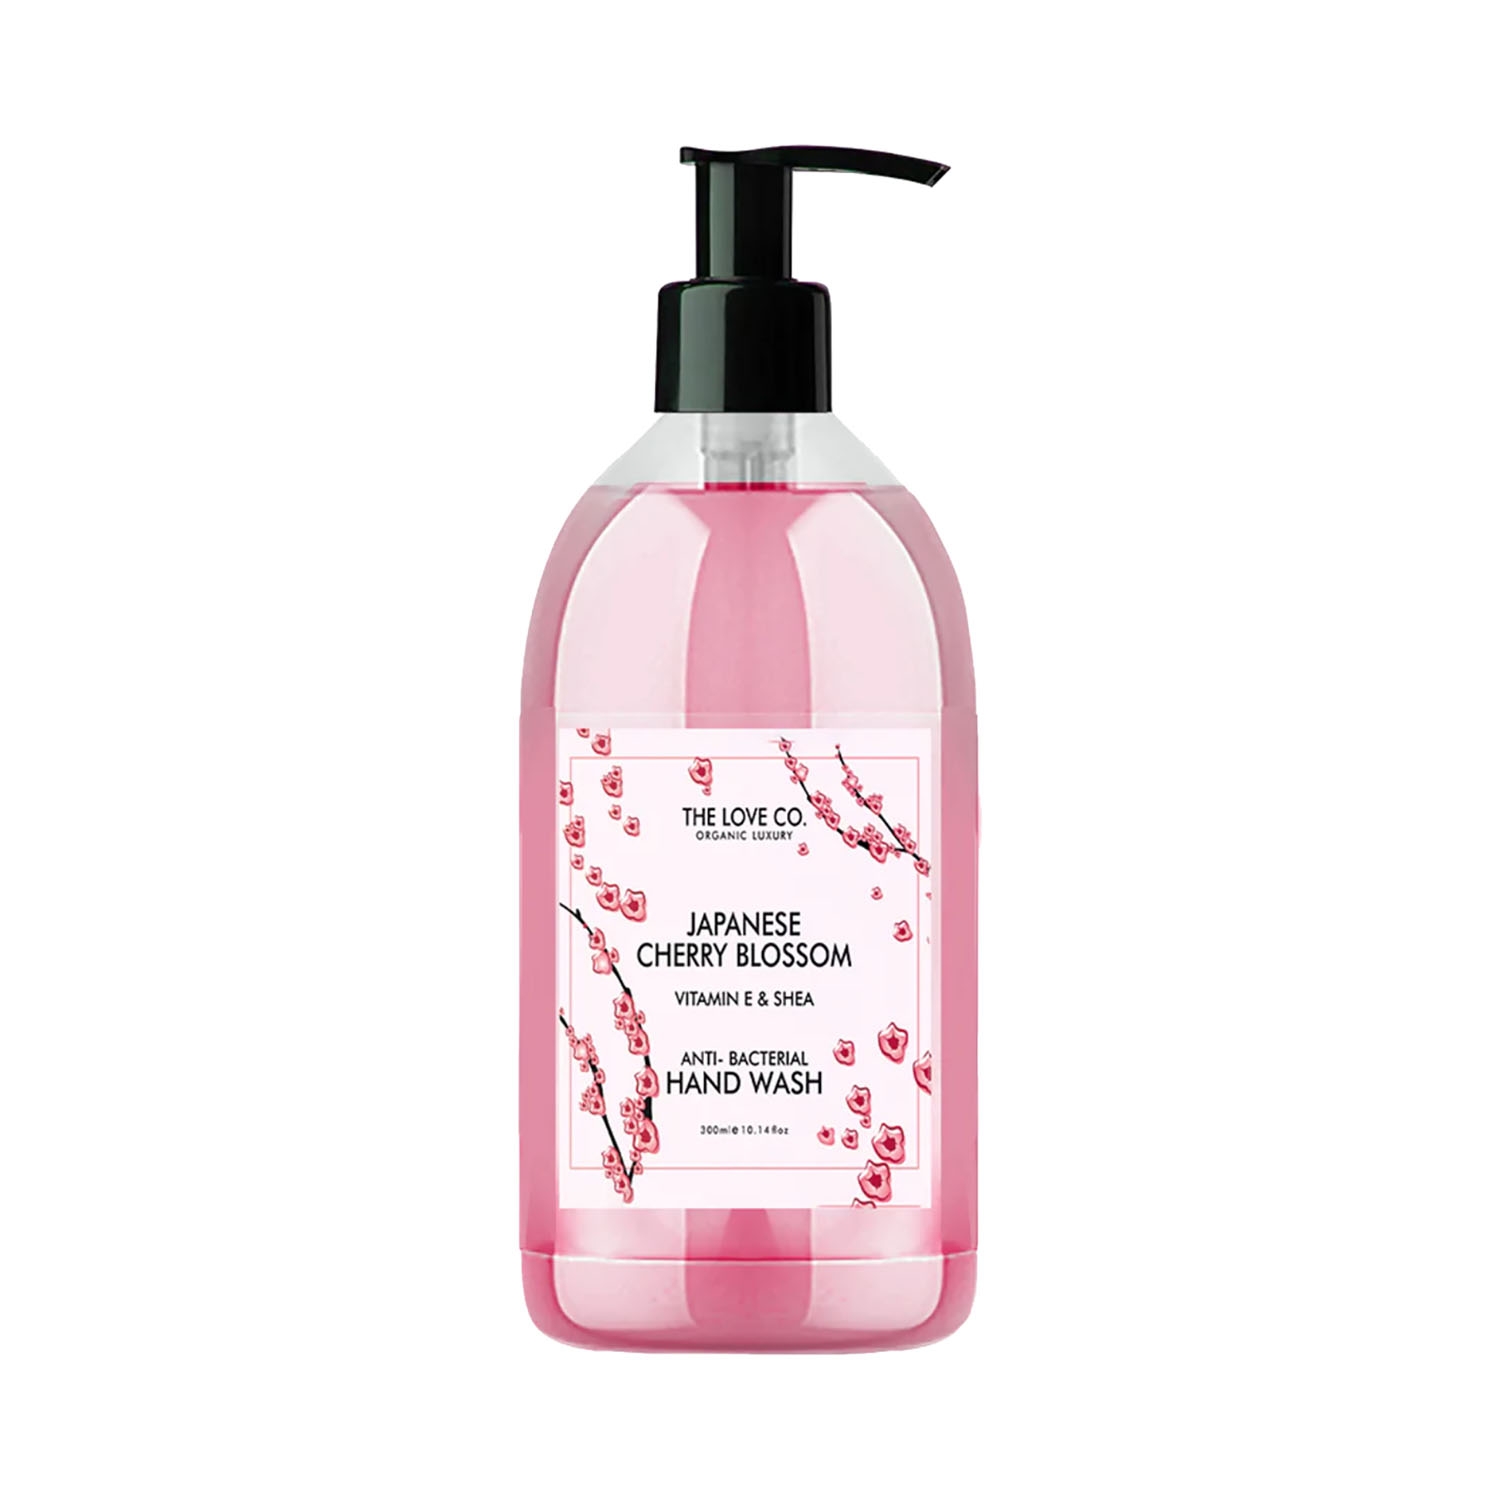 THE LOVE CO. | THE LOVE CO. Japanese Cherry Blossom Hand Wash For Moisturized Hands (300ml)